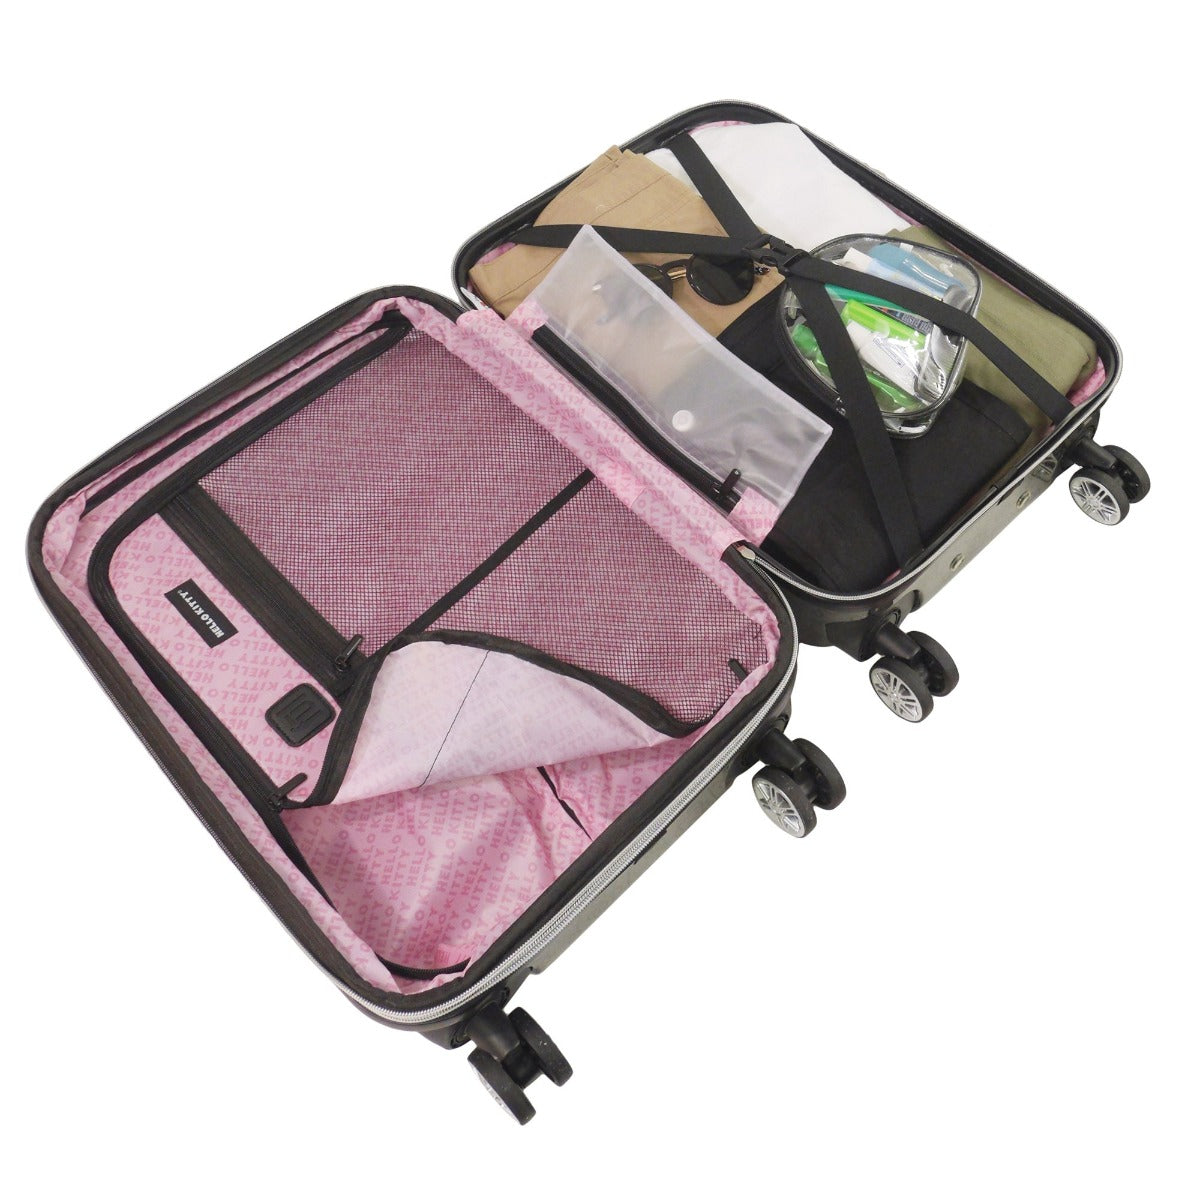 Hello Kitty Pose All Over Print 29.5" Hard-Sided Luggage Black checked spinner suitcase interior